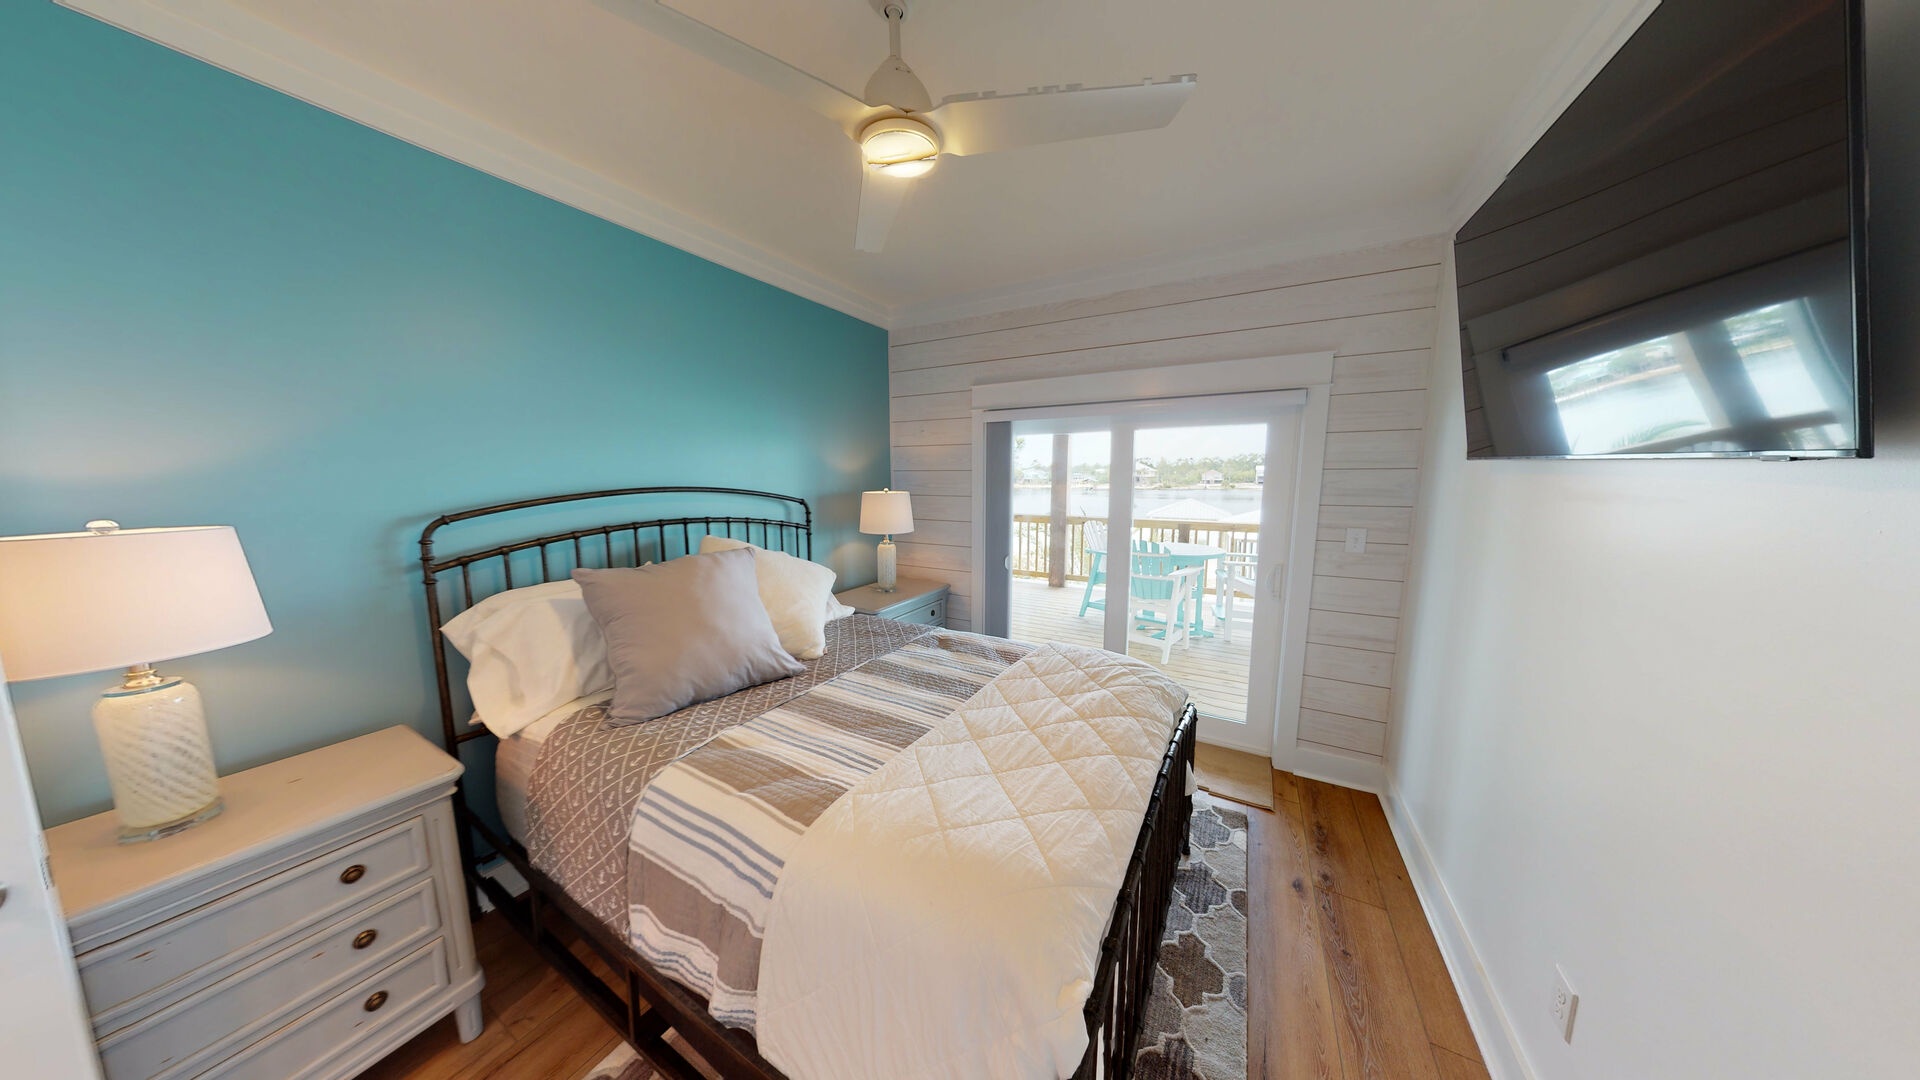 Bedroom #3 is on the 2nd floor with a king bed, TV, water views, balcony access and attached bathroom